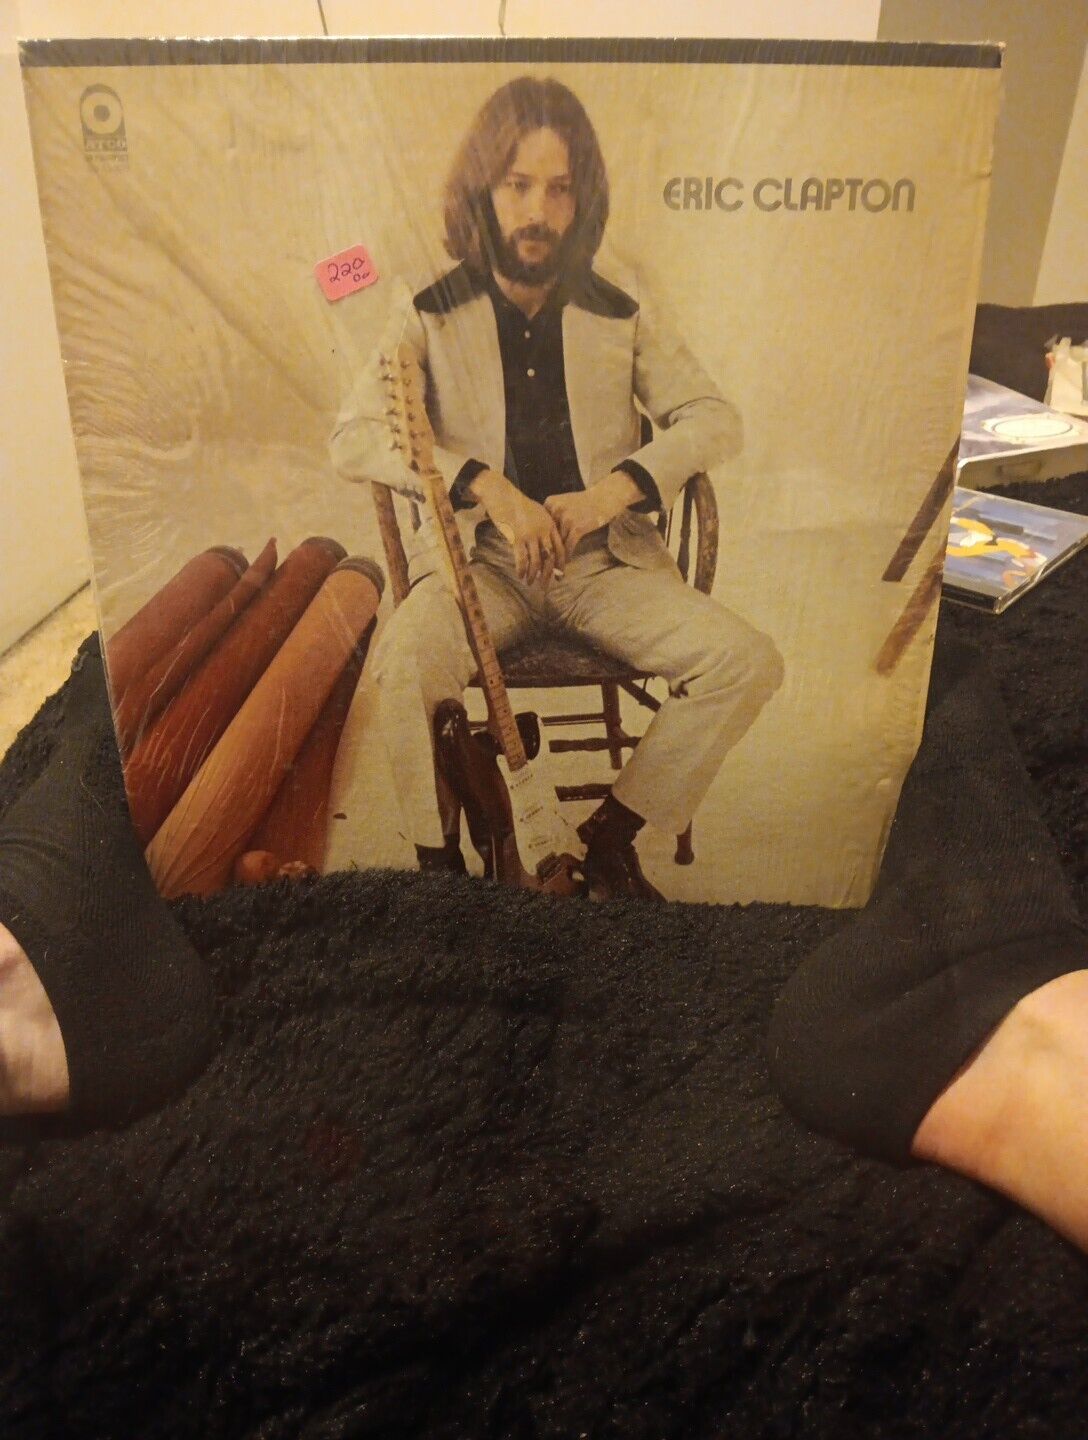 Eric Clapton Record Signed